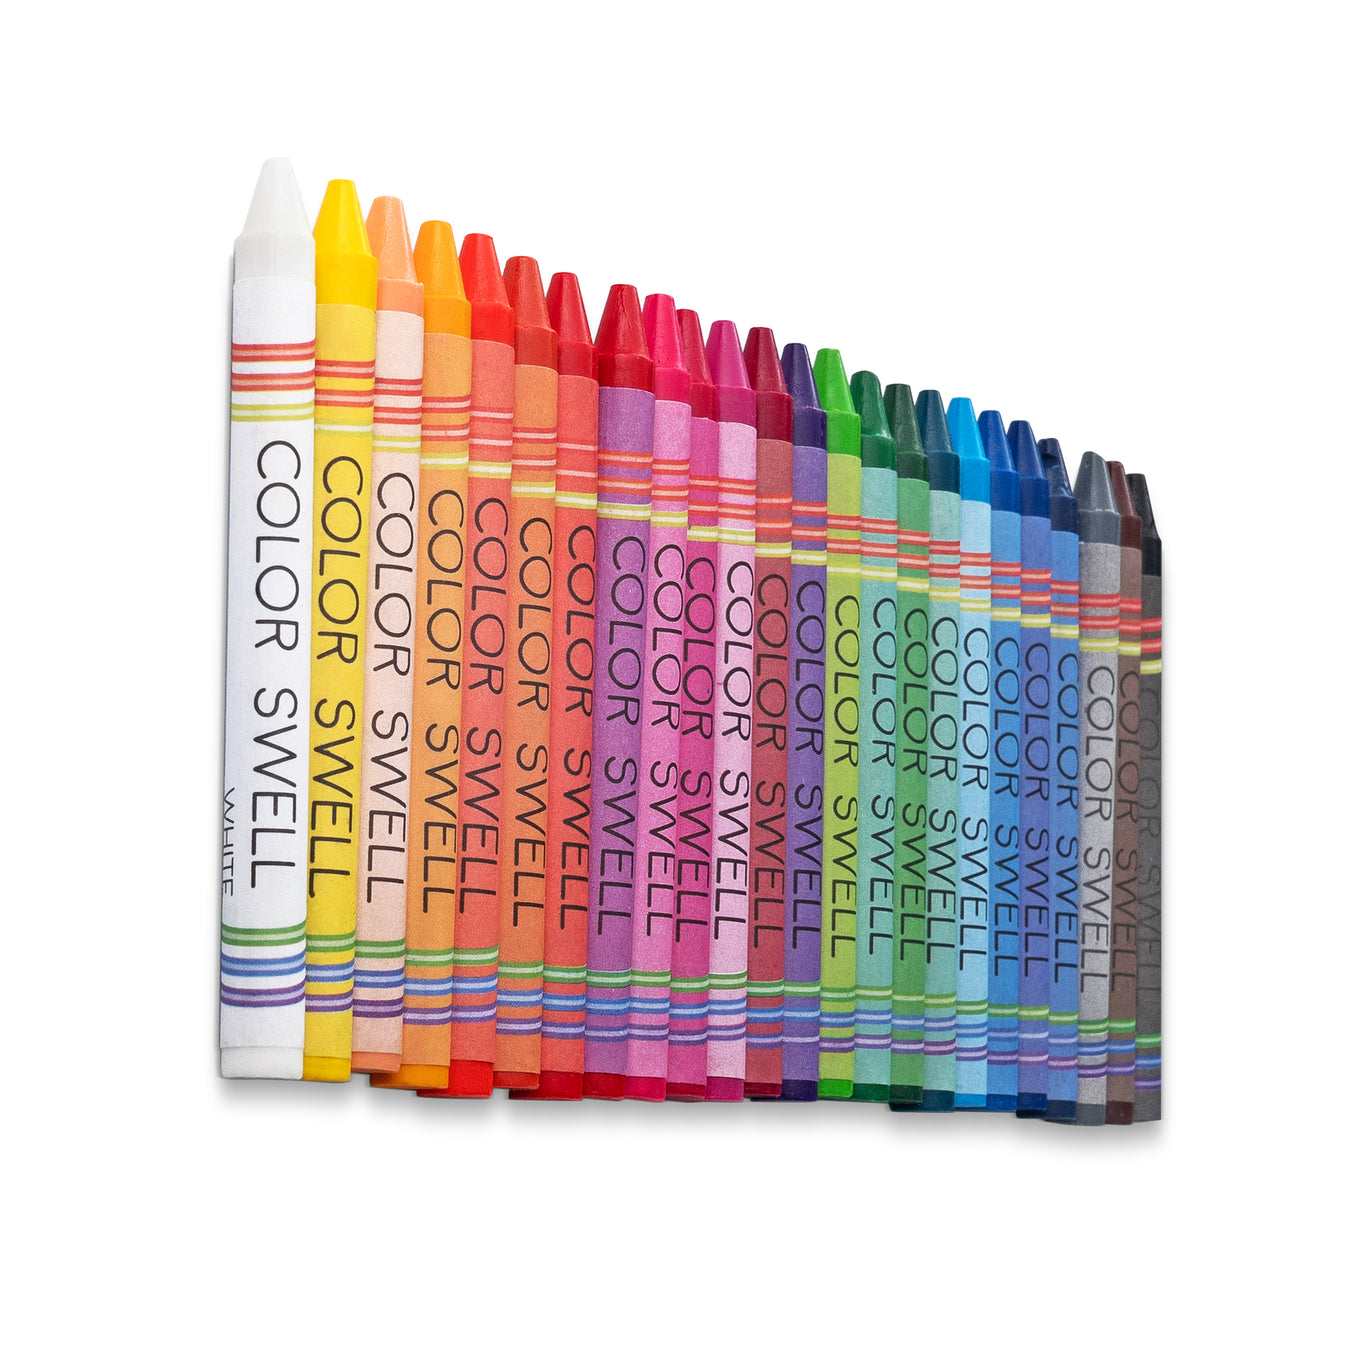 Color Swell Neon Crayon Pack - One Box of Fun Neon Crayons (8